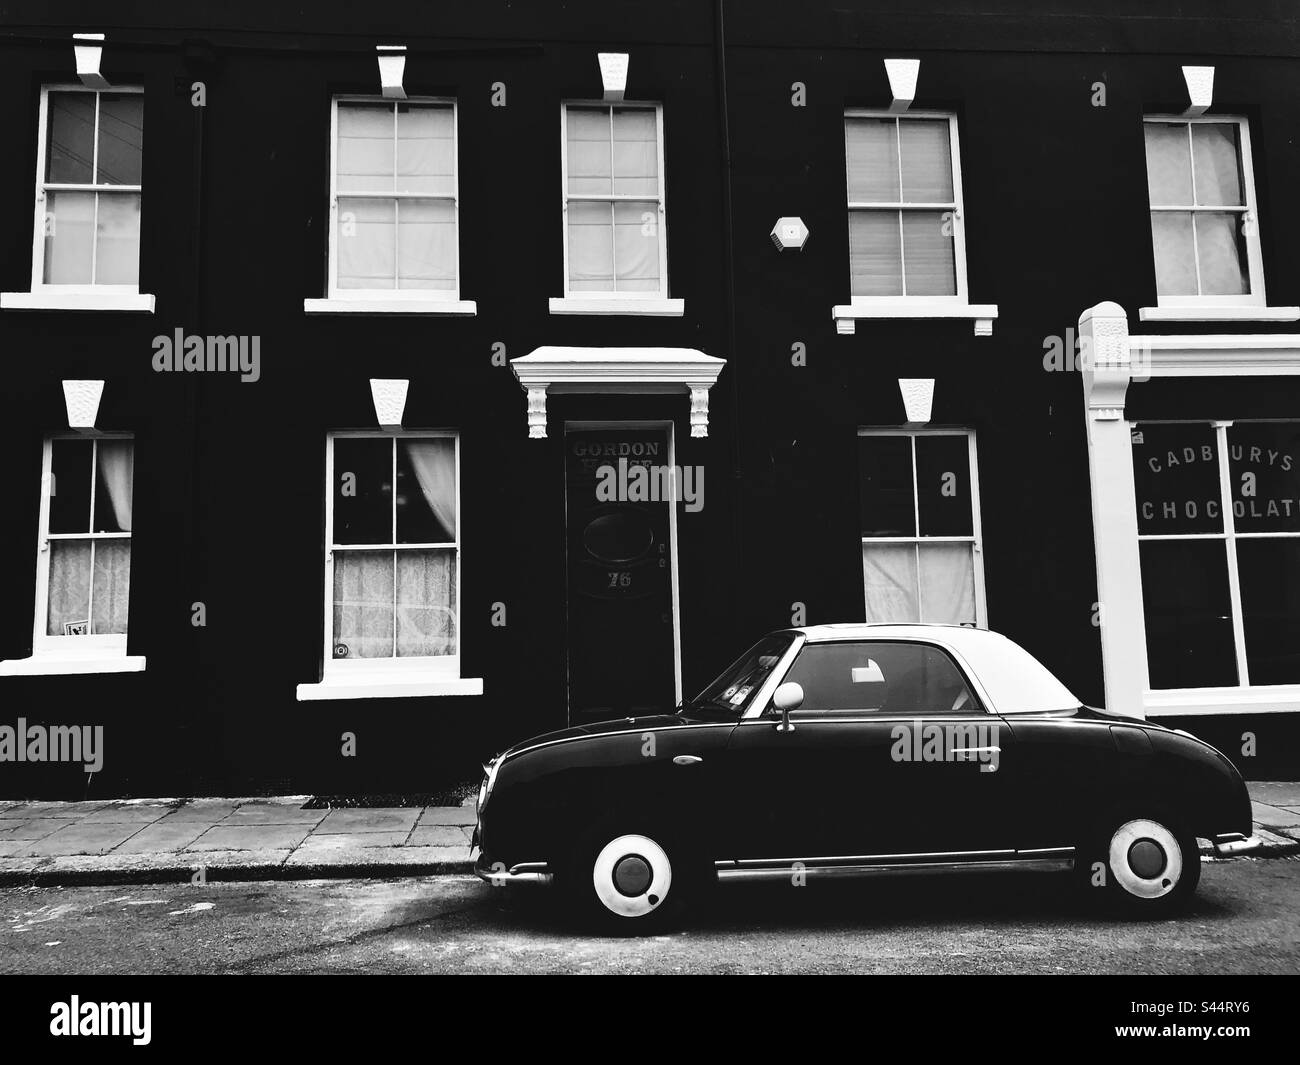 Vintage nissan car Black and White Stock Photos & Images - Alamy